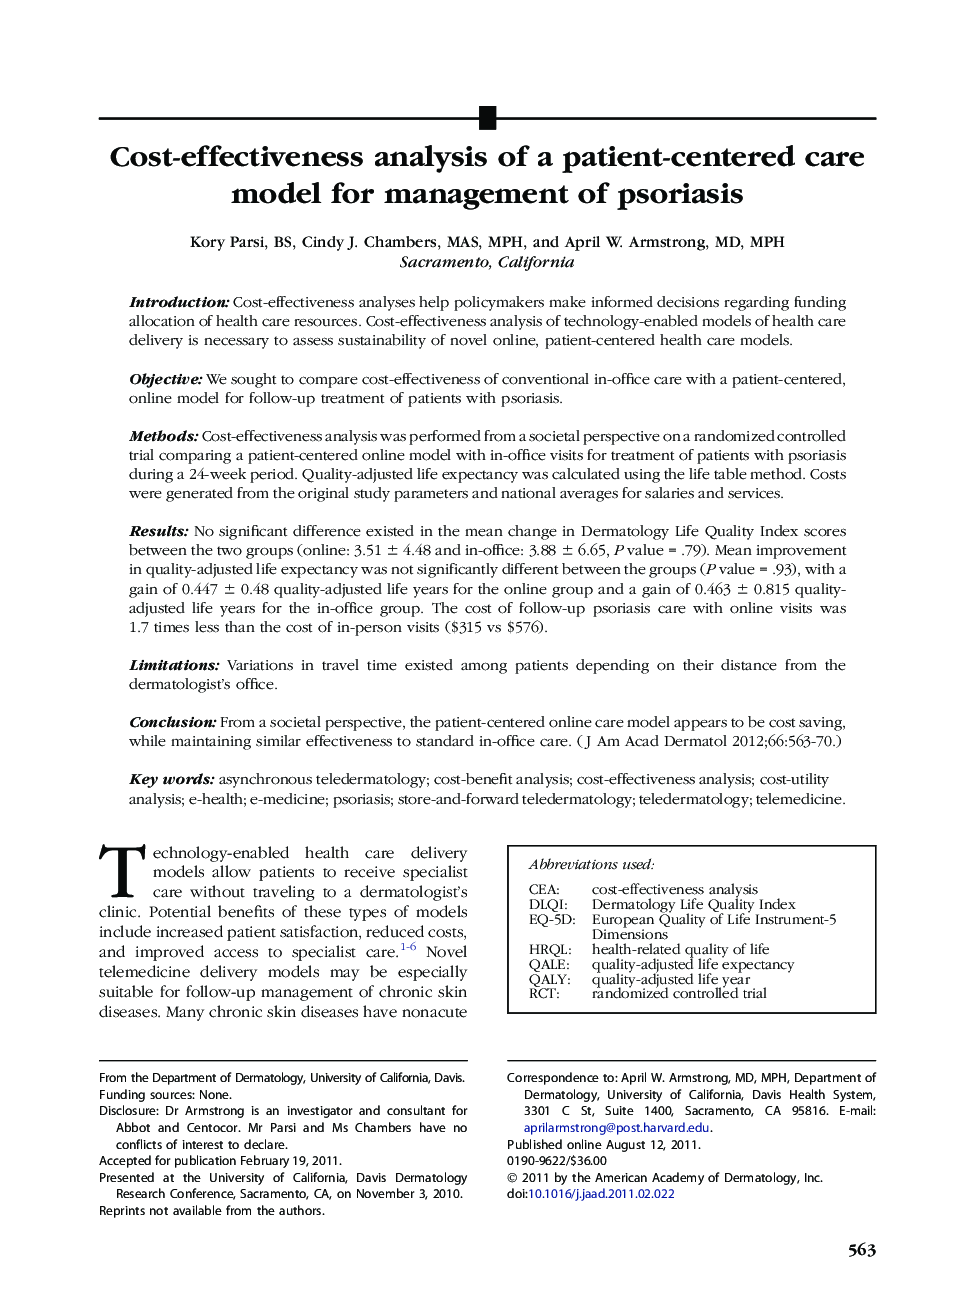 Cost-effectiveness analysis of a patient-centered care model for management of psoriasis 